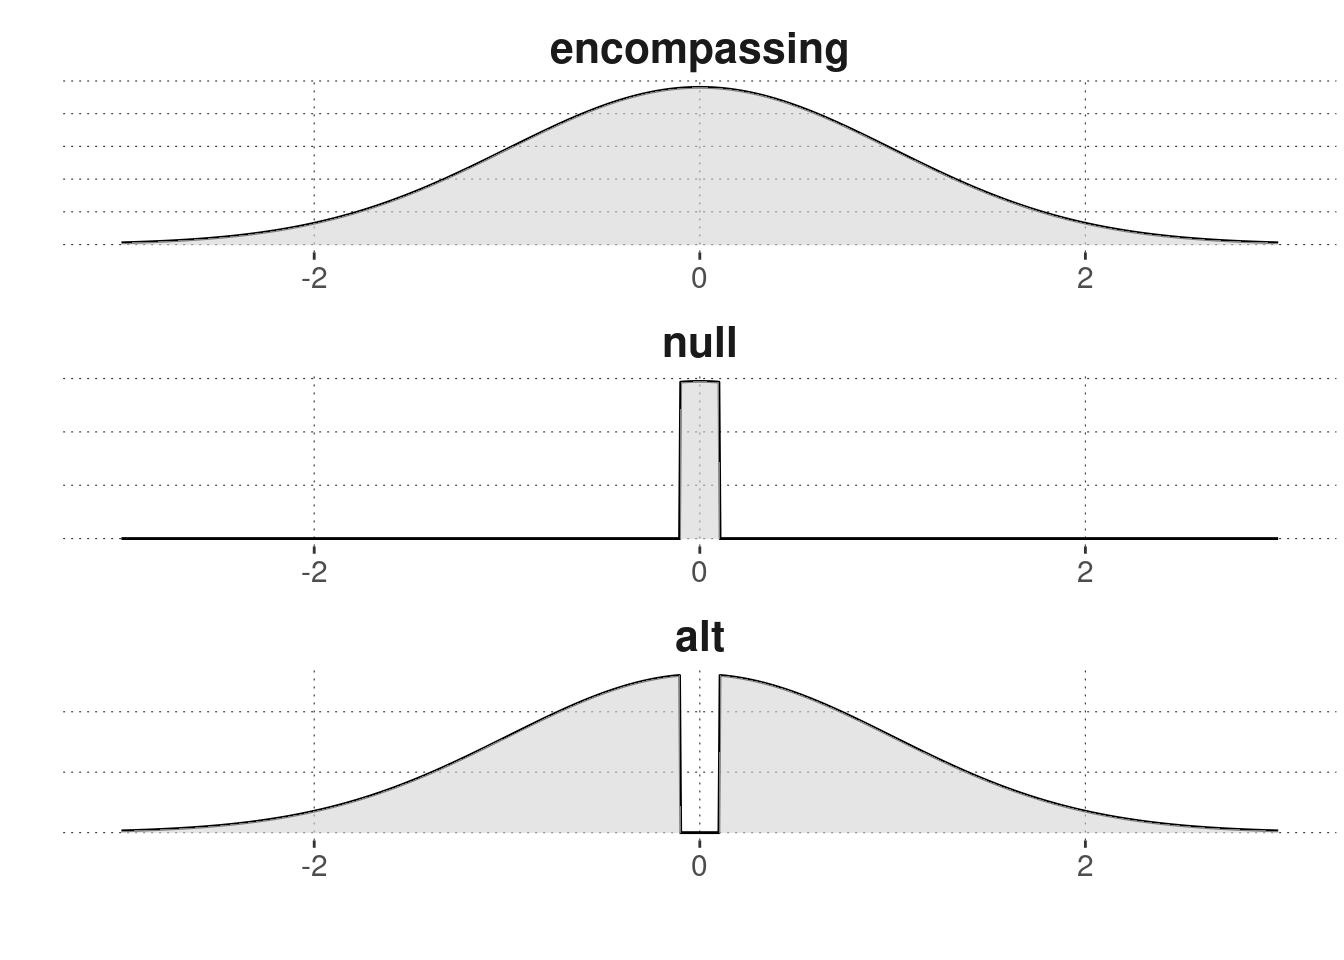 Example of the prior of an encompassing model and the priors of two models nested under it.